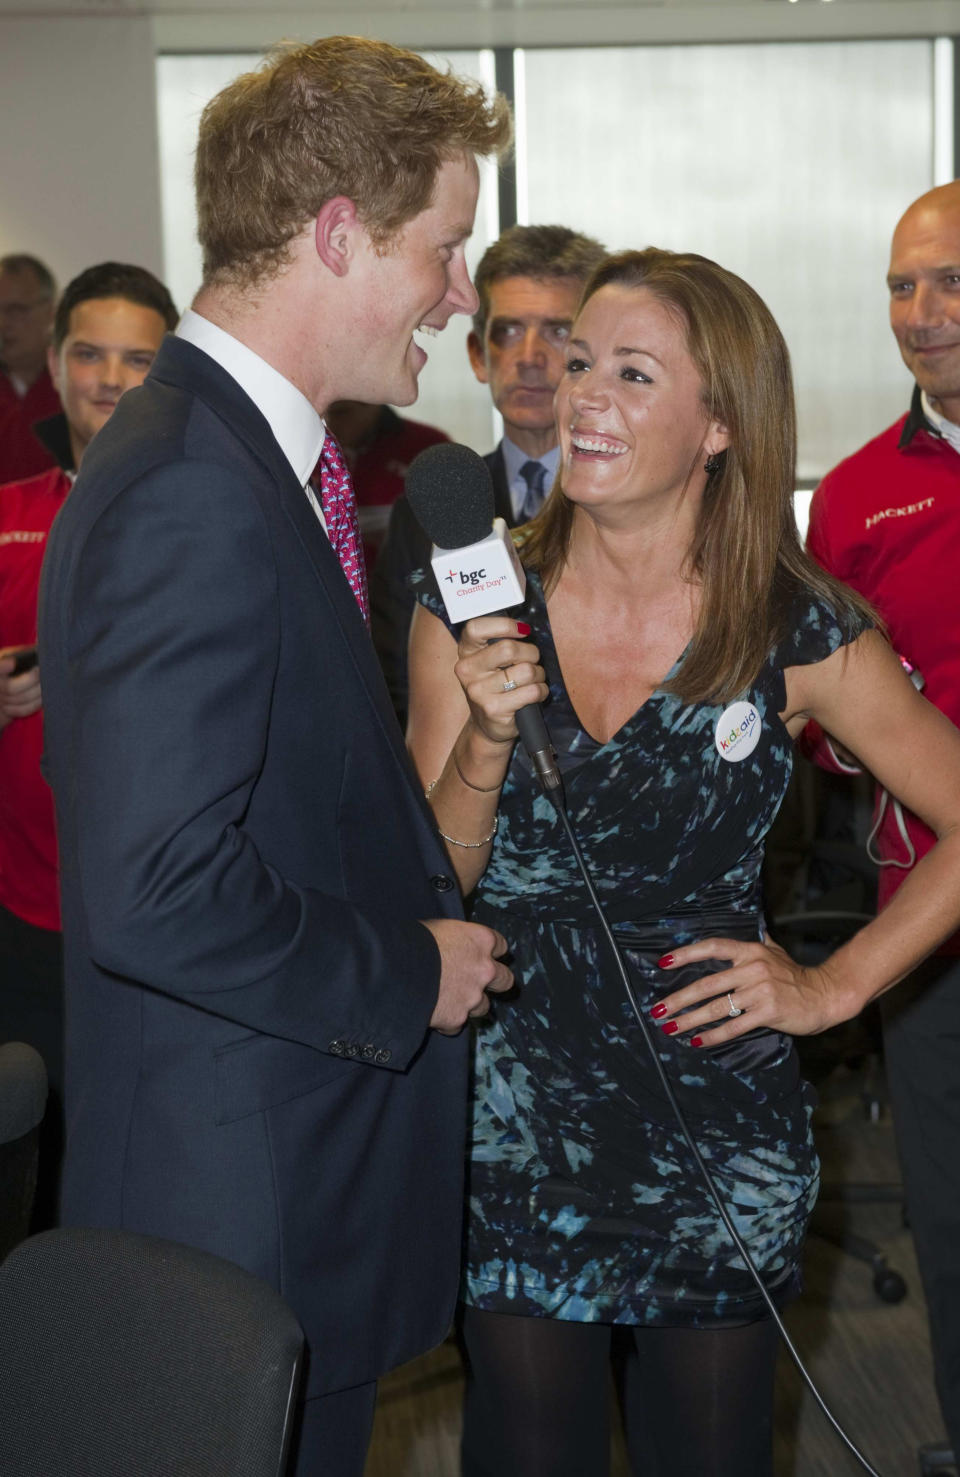 Britain&#39;s Prince Harry talks to British TV and radio presenter Natalie Pinkham on the trading floor as he attends BGC Partners&#39; Charity Day in London, on September 12, 2011. Britain&#39;s Prince Harry, co-founder and Patron of Sentebale, today attended BGC Partners&#x002019; Charity Day, which is held each year to commemorate the company&#x002019;s 658 employees who lost their lives in the 9/11 attacks on the World Trade Center. Prince Harry helped raise money for Sentebale and other charities by supporting BGC Partners in deals on the trading floor. AFP PHOTO / PAUL GROVER / POOL (Photo credit should read PAUL GROVER/AFP via Getty Images)